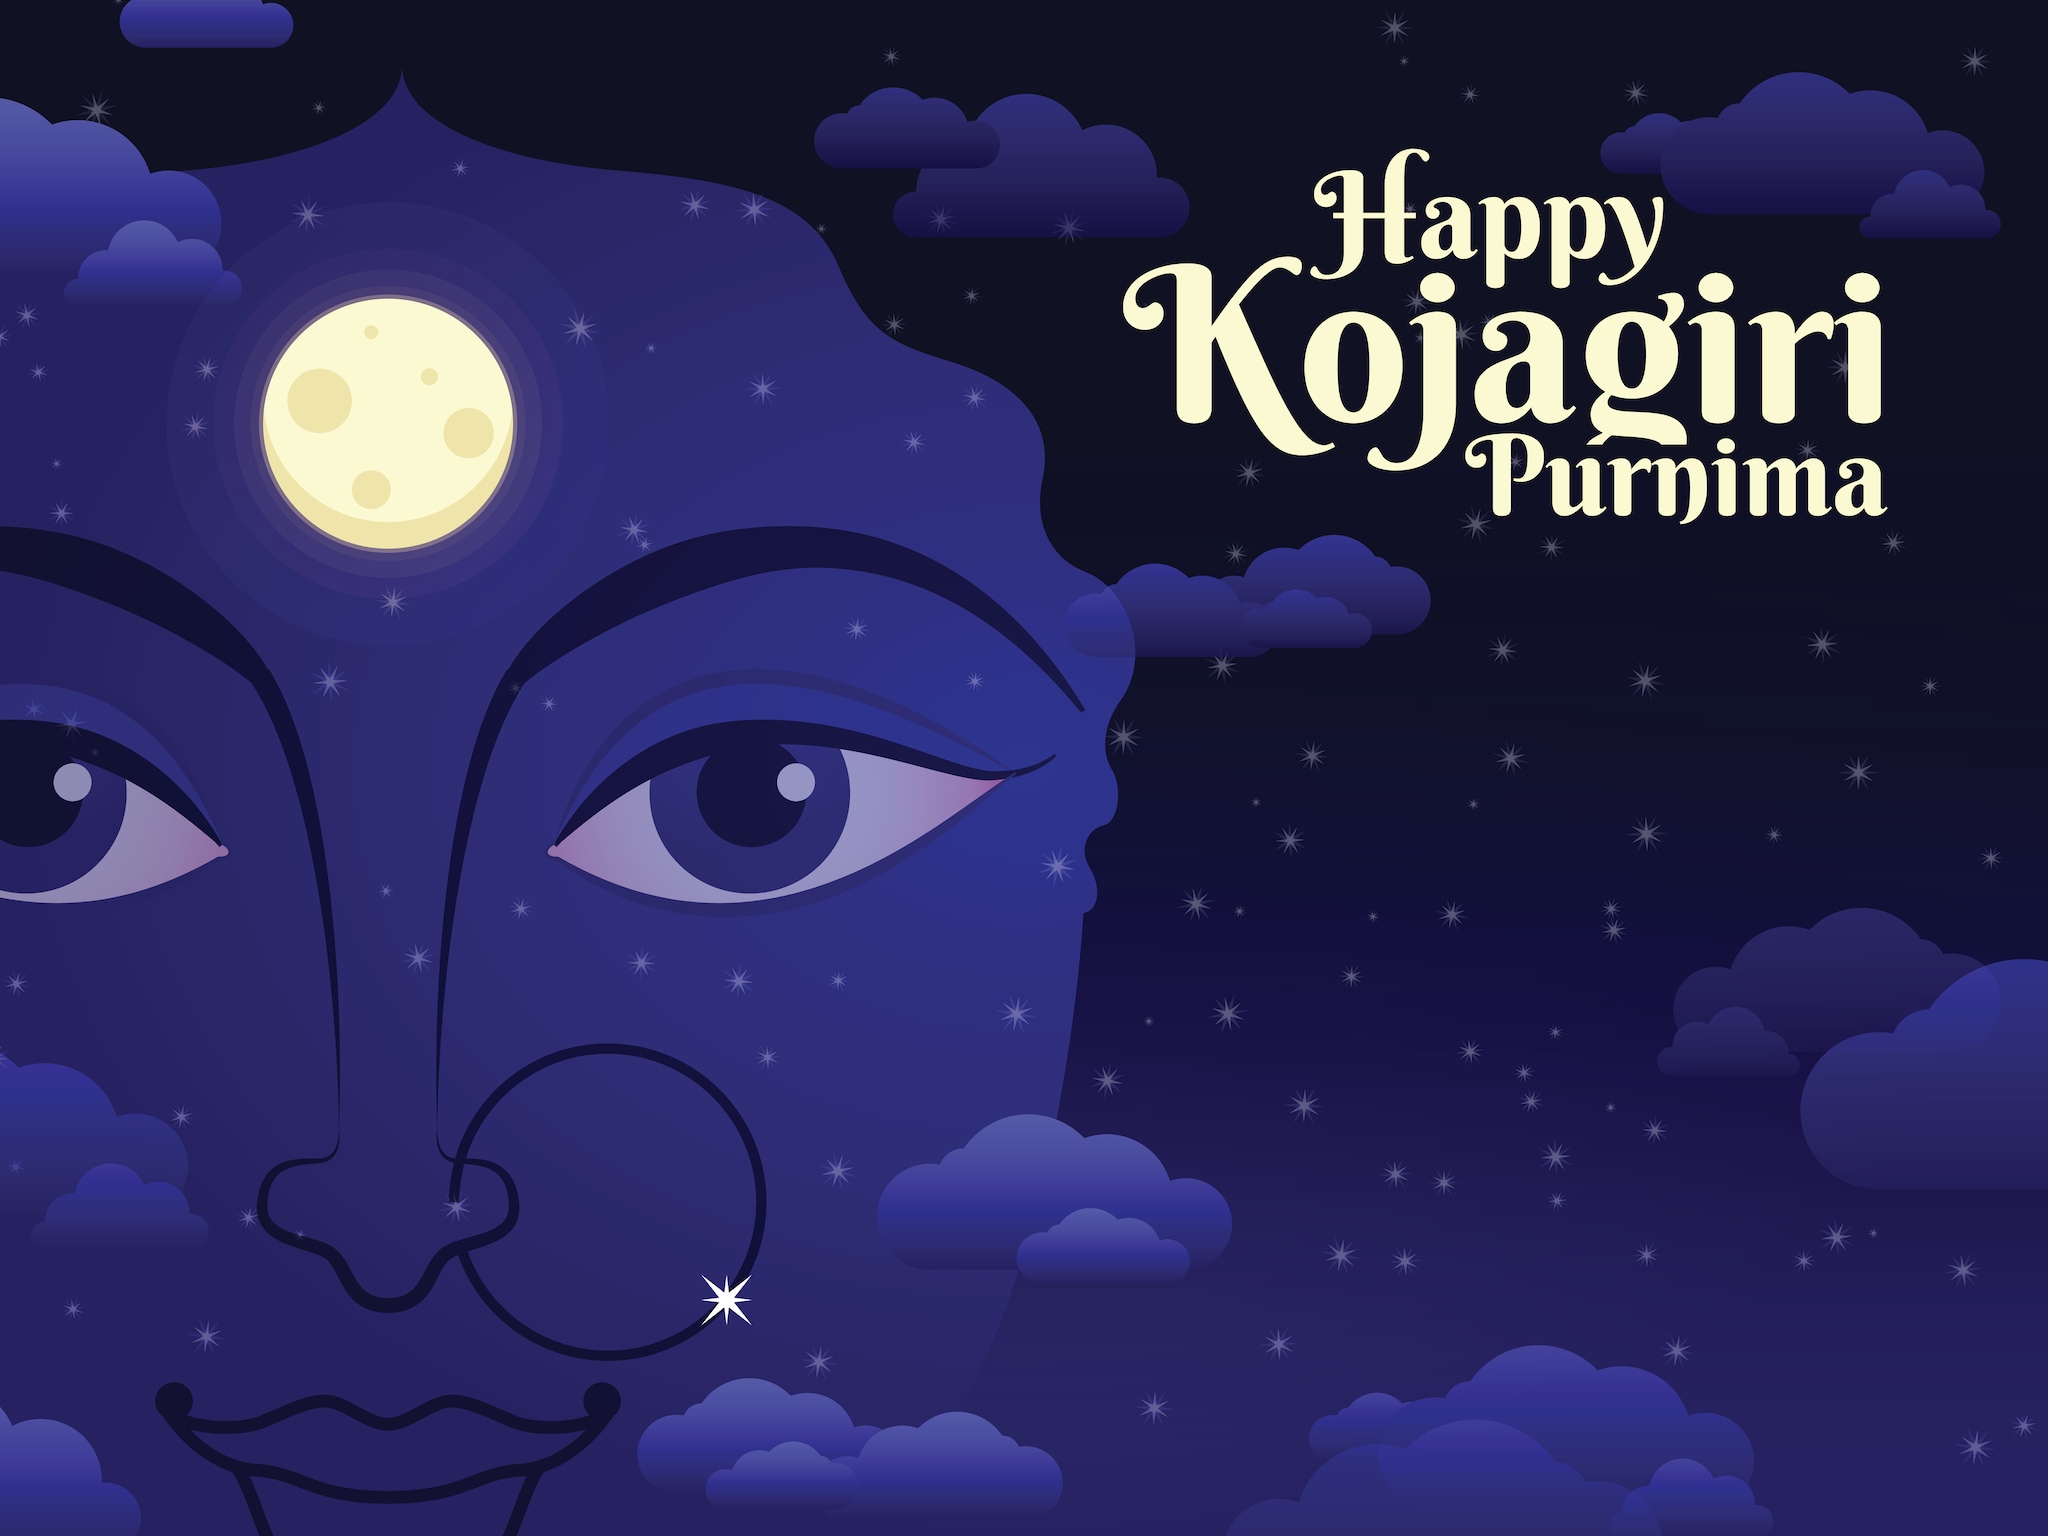 This Sharad Purnima, I pray for well-being and prosperity of you and your family. (Image: Shutterstock)